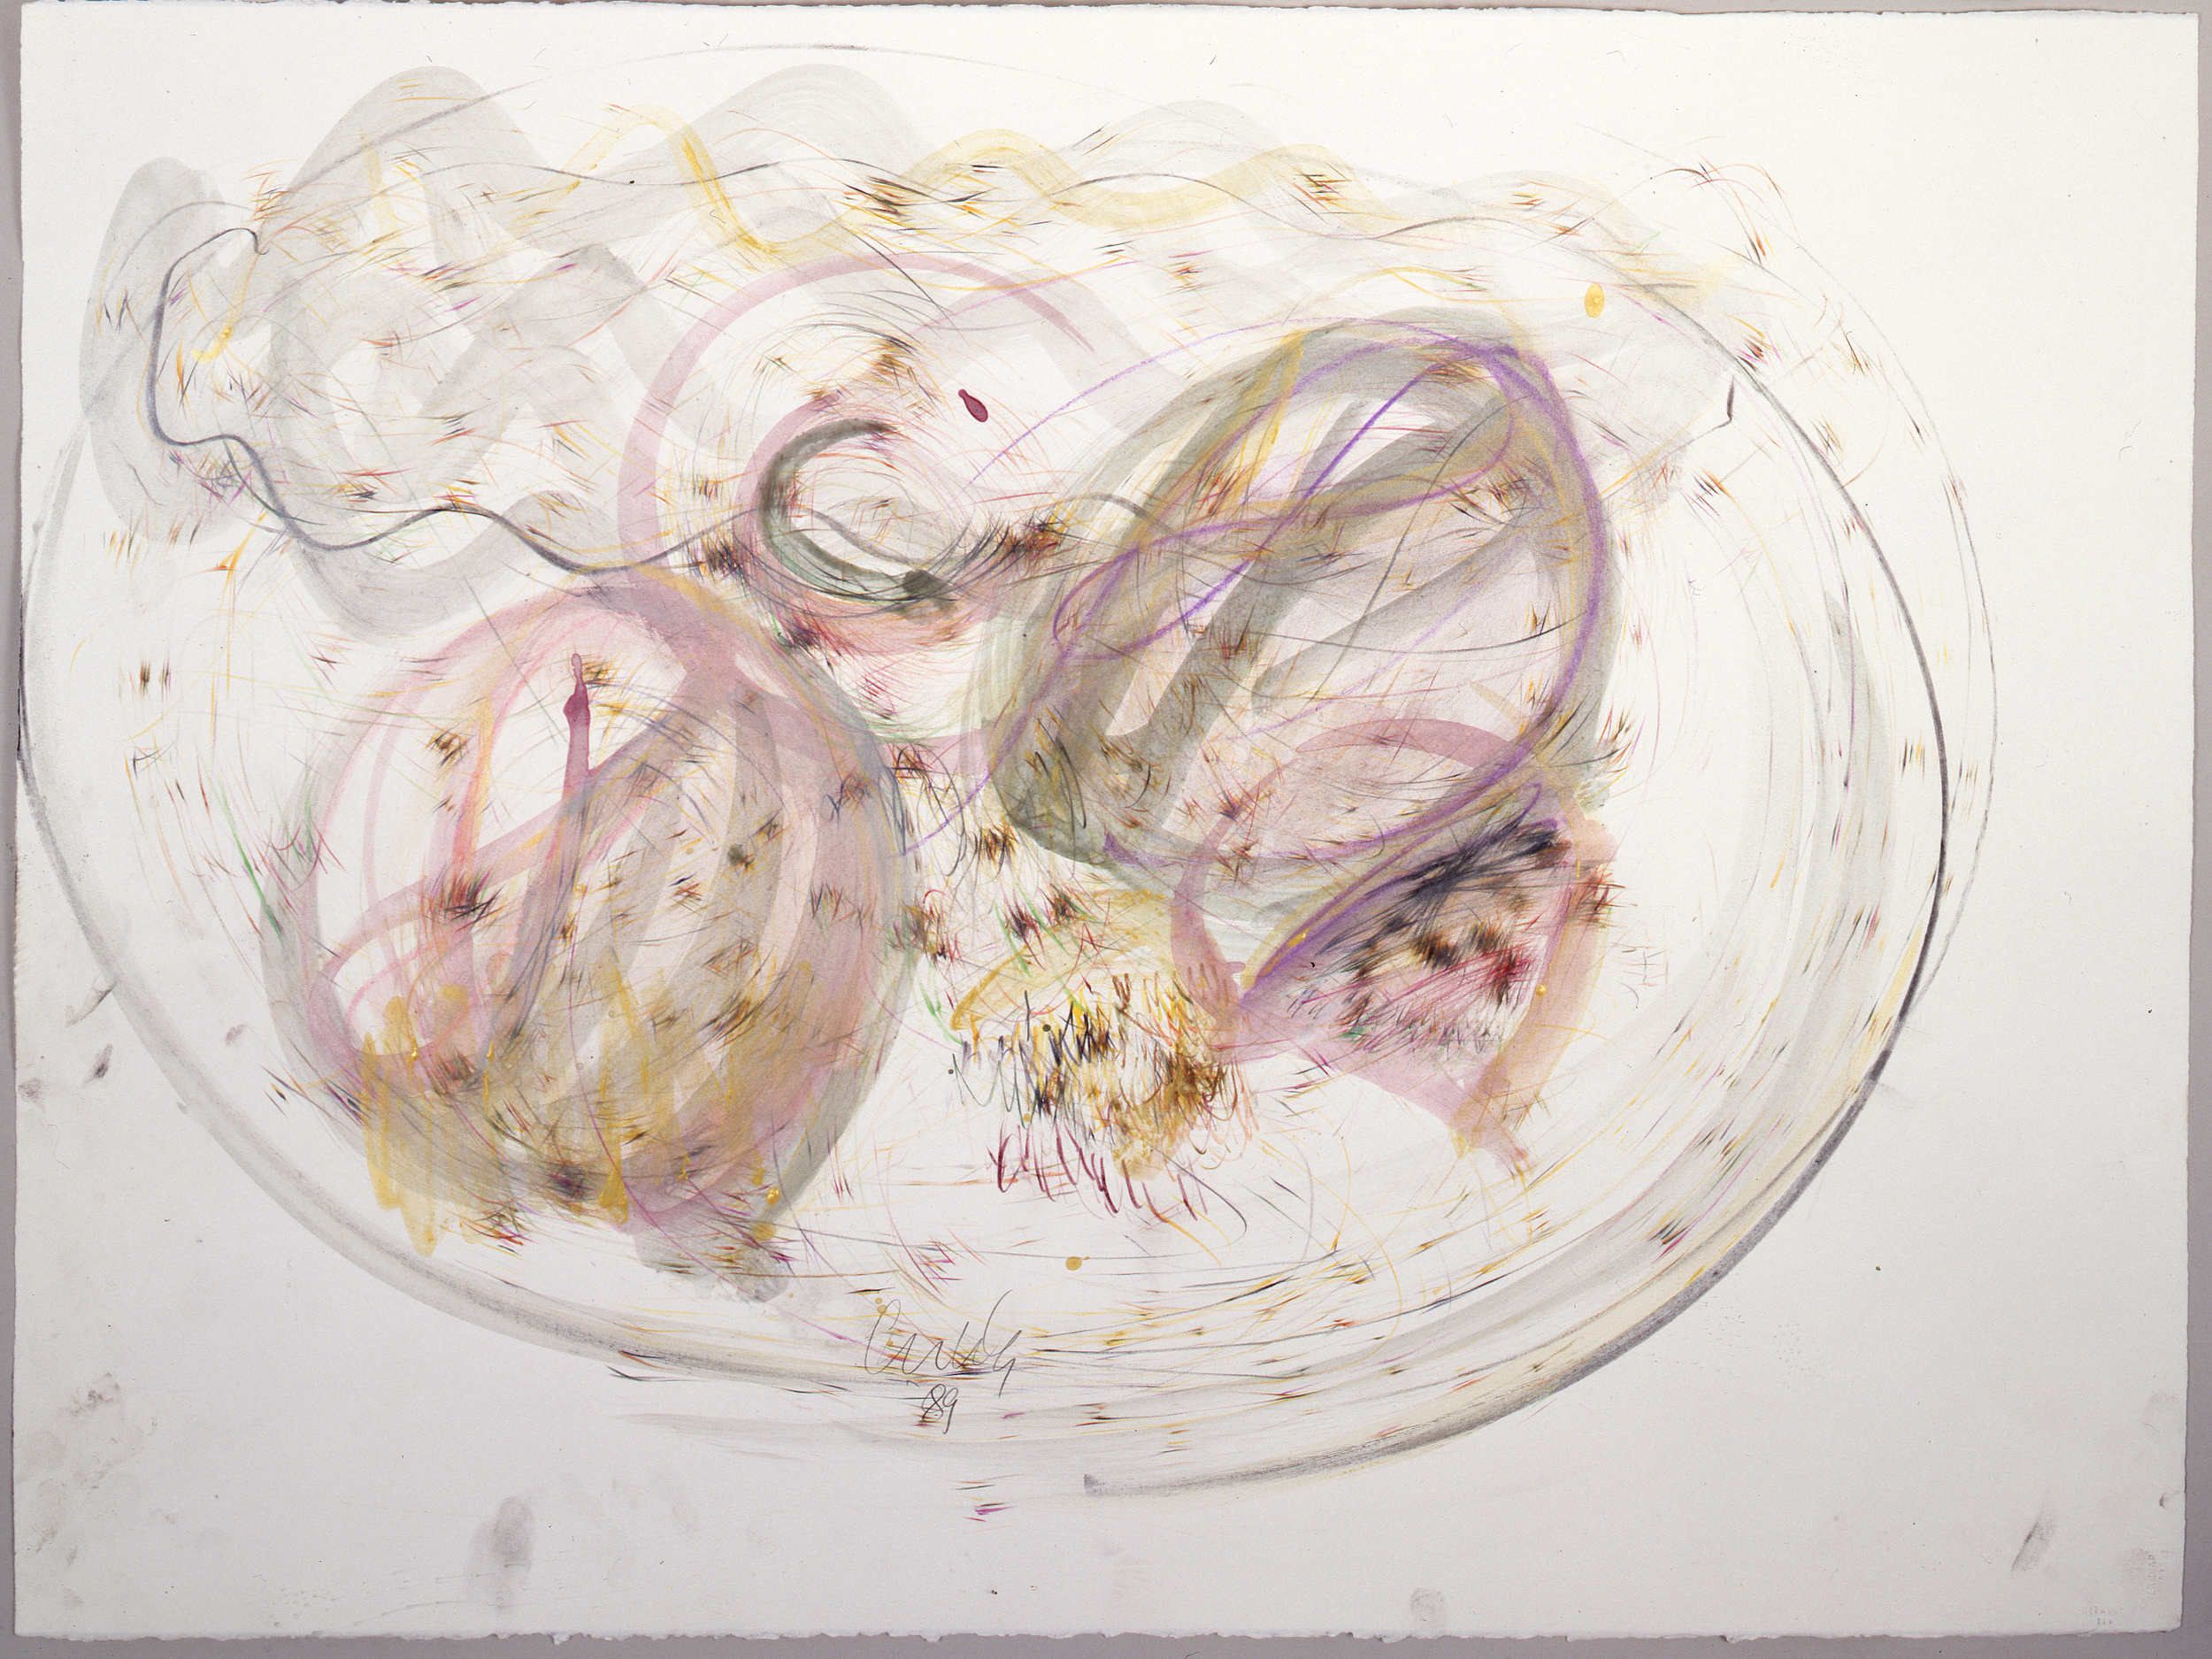  Dale Chihuly,&nbsp; Niijima Drawing #31,&nbsp; (1989, colored pencil, watercolor and graphite&nbsp;on paper, 22 x 30 inches), DC.373 